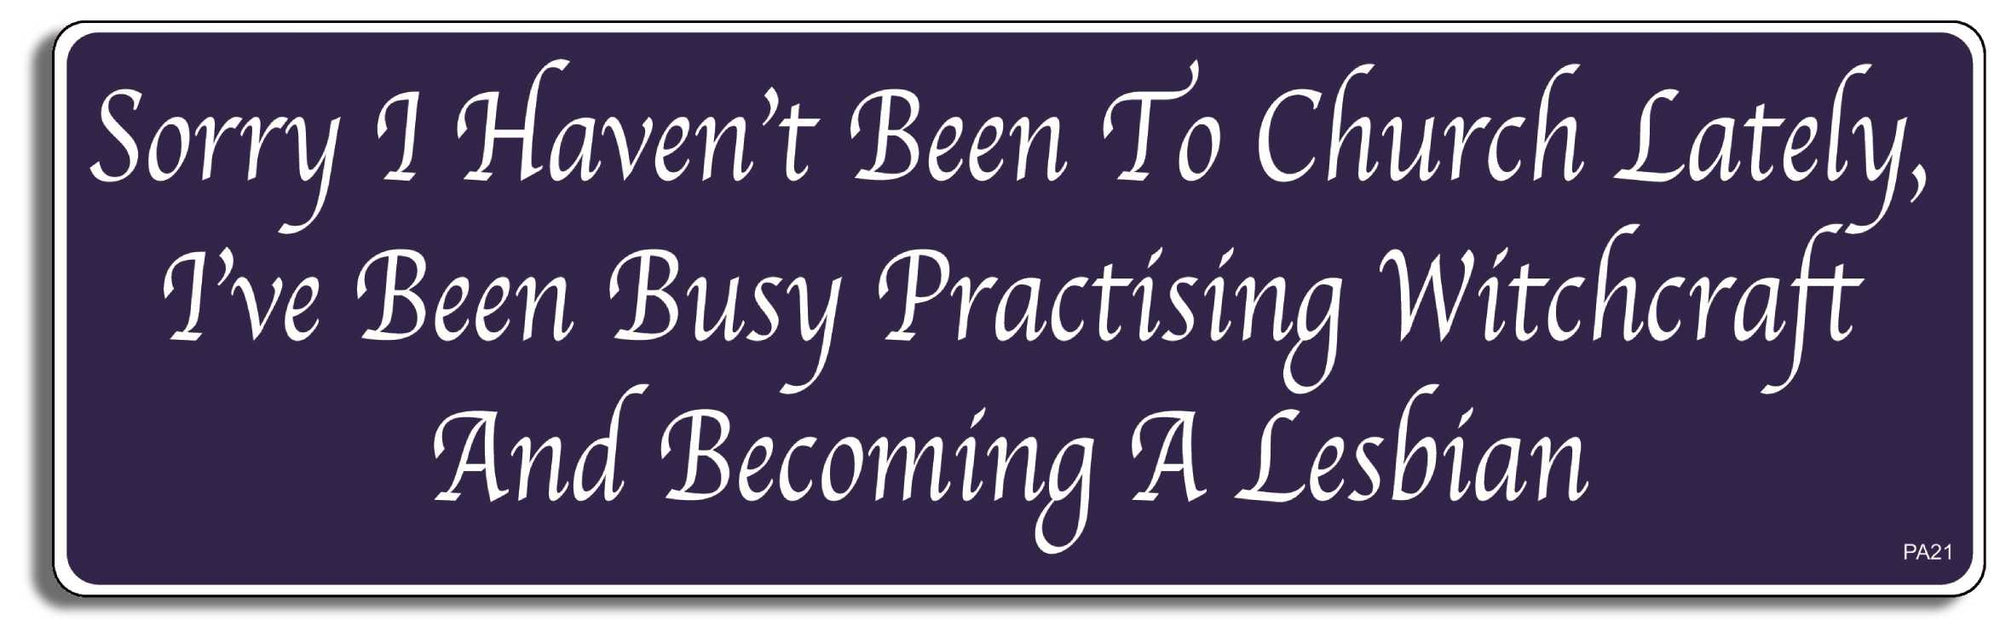 Sorry I haven't been to Church lately, I've been practising Witchcraft and becoming a lesbian  - 3" x 10" Bumper Sticker--Car Magnet- -  Decal Bumper Sticker-pagan Bumper Sticker Car Magnet Sorry I haven't been to Church lately,-  Decal for carsatheist, pagan, wiccan, witch